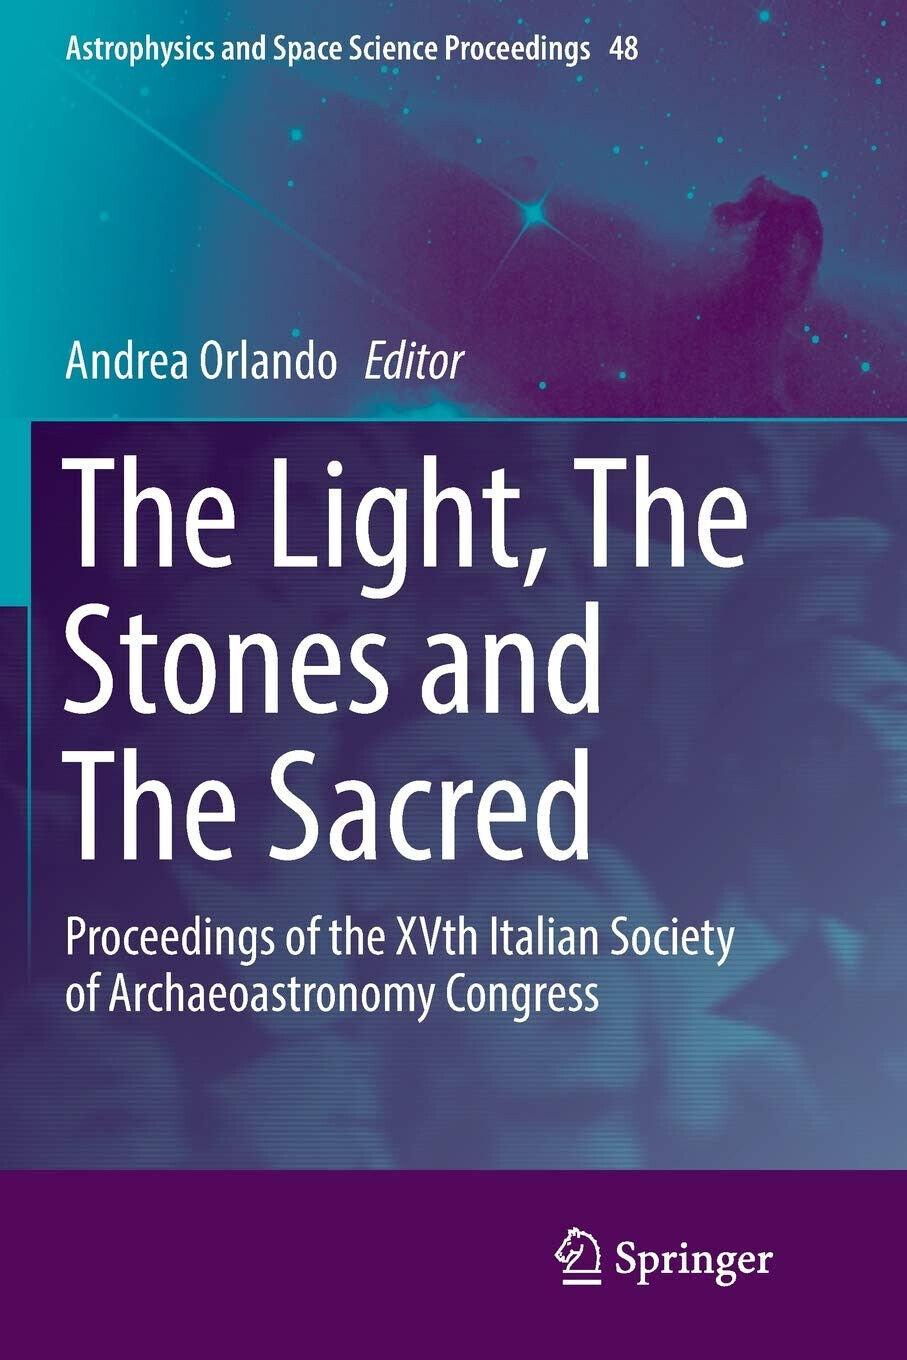 The Light, The Stones and The Sacred - Andrea Orlando - Springer, 2018